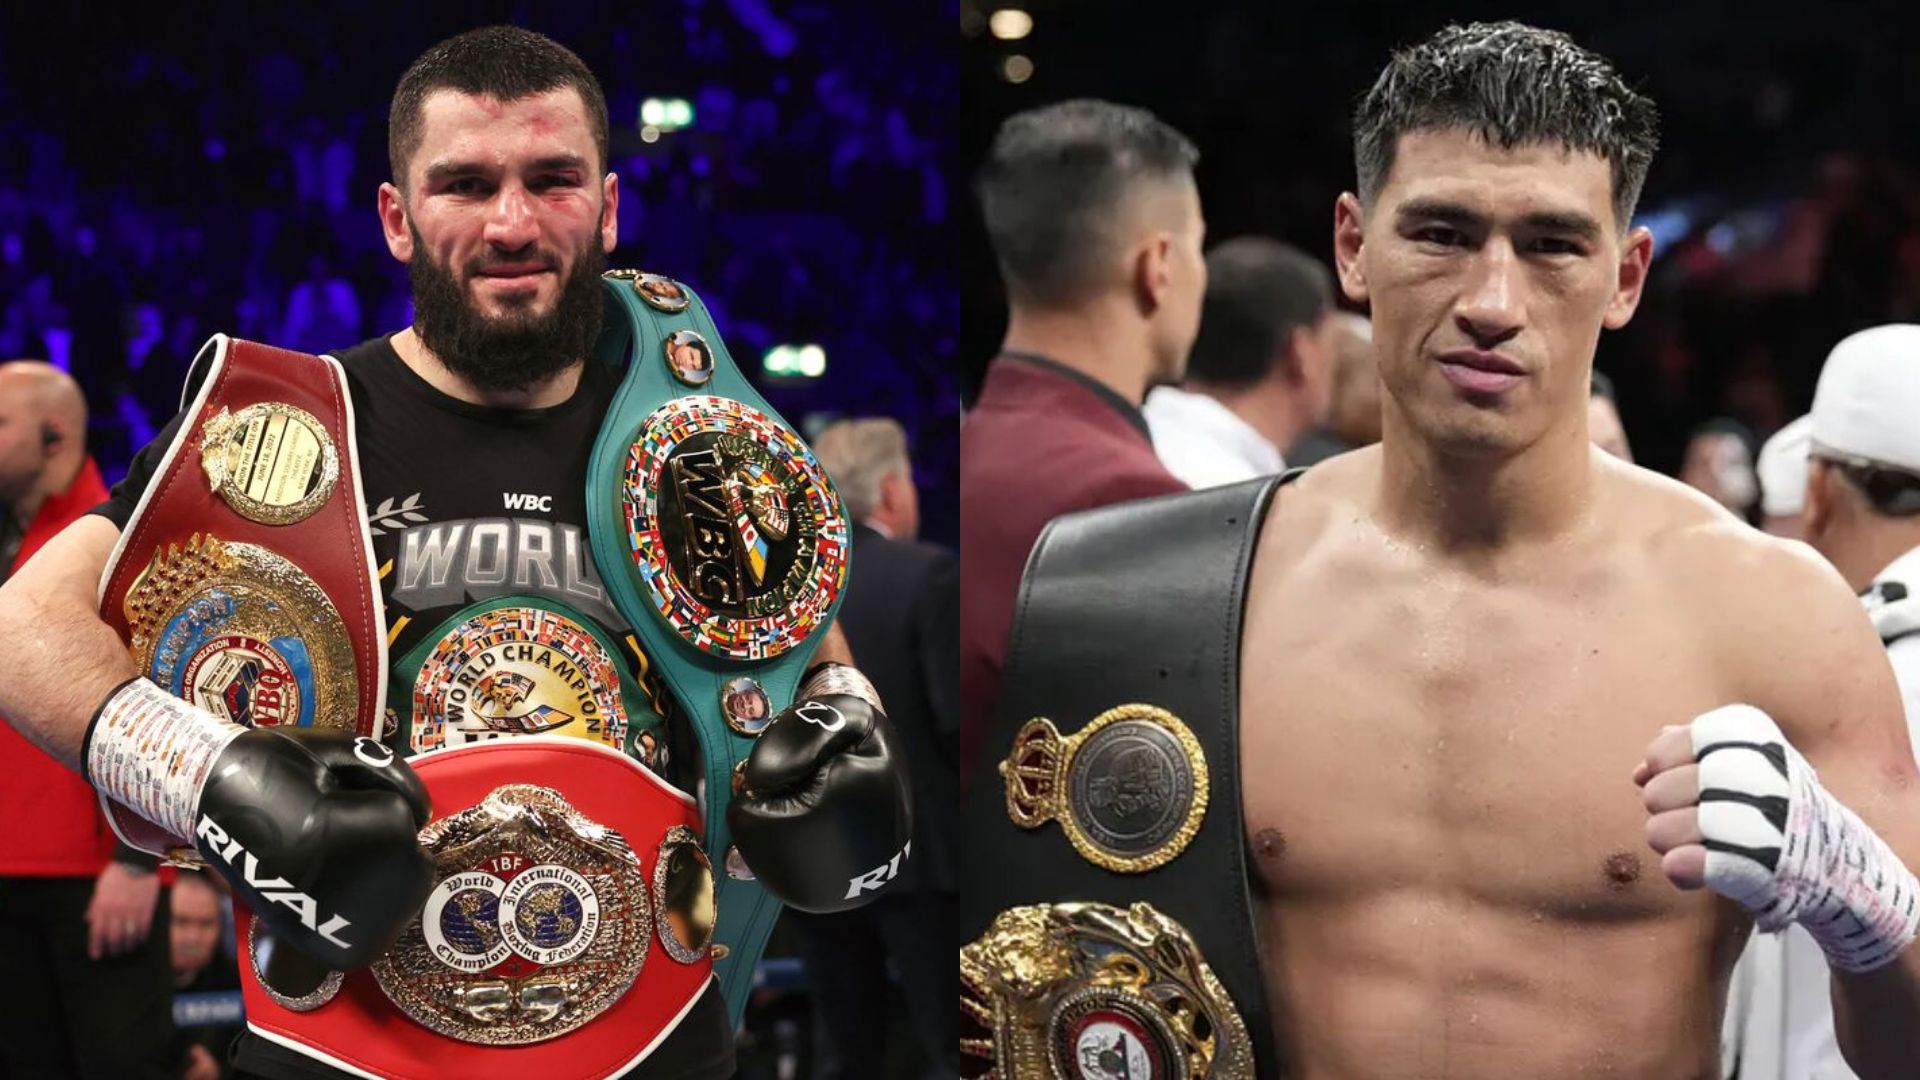 Dmitry Bivol and Artur Beterbiev posing for phots after their respective wins